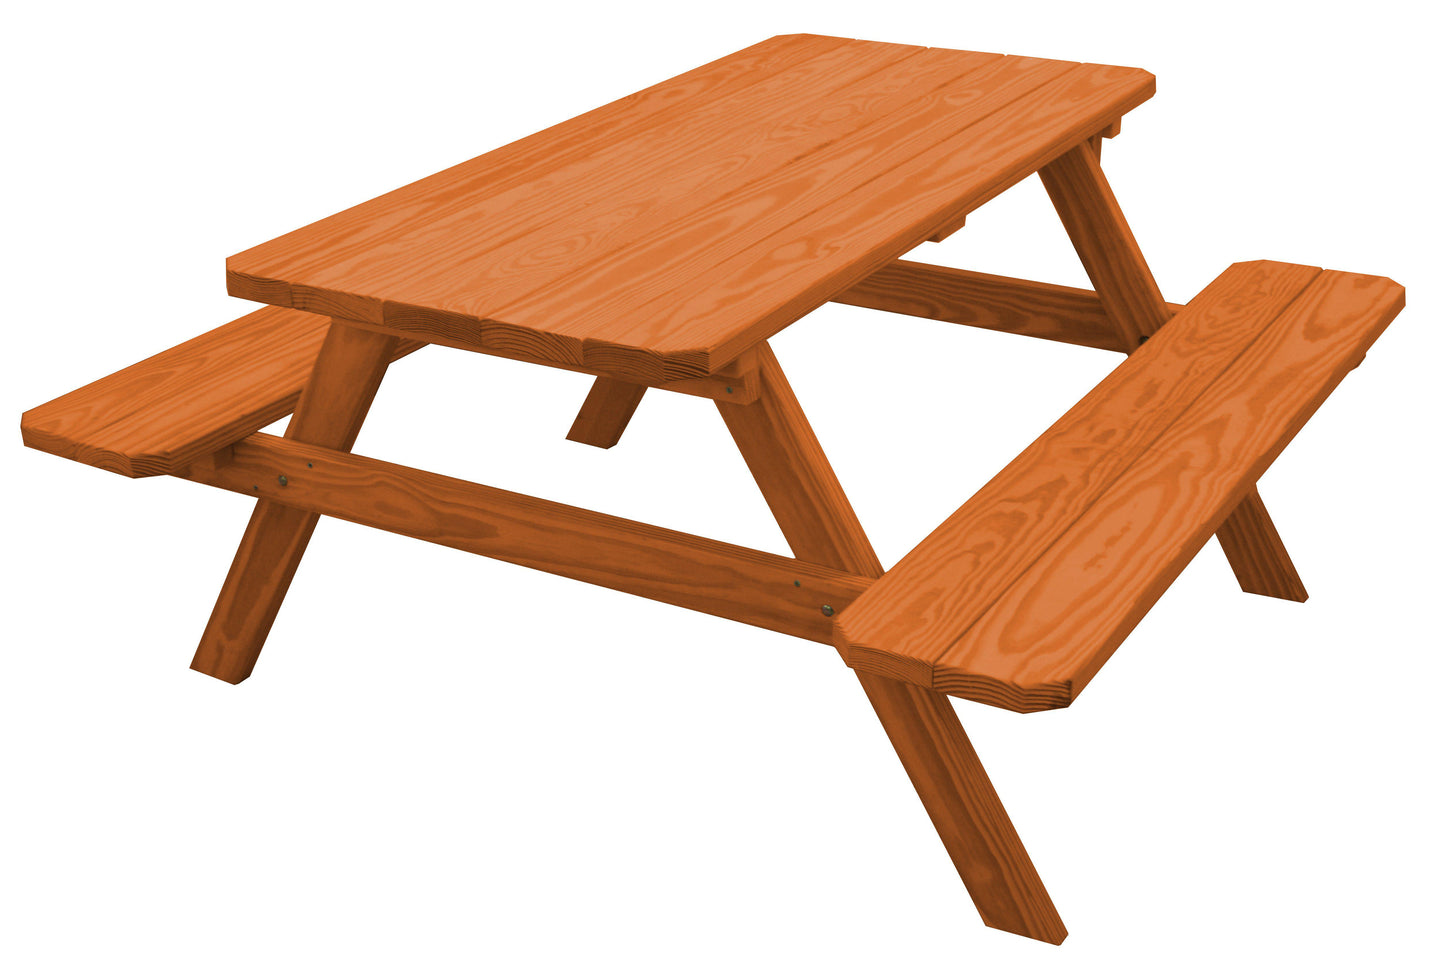 A&L Furniture Co. Yellow Pine 5' Picnic Table with Attached Benches - LEAD TIME TO SHIP 10 BUSINESS DAYS